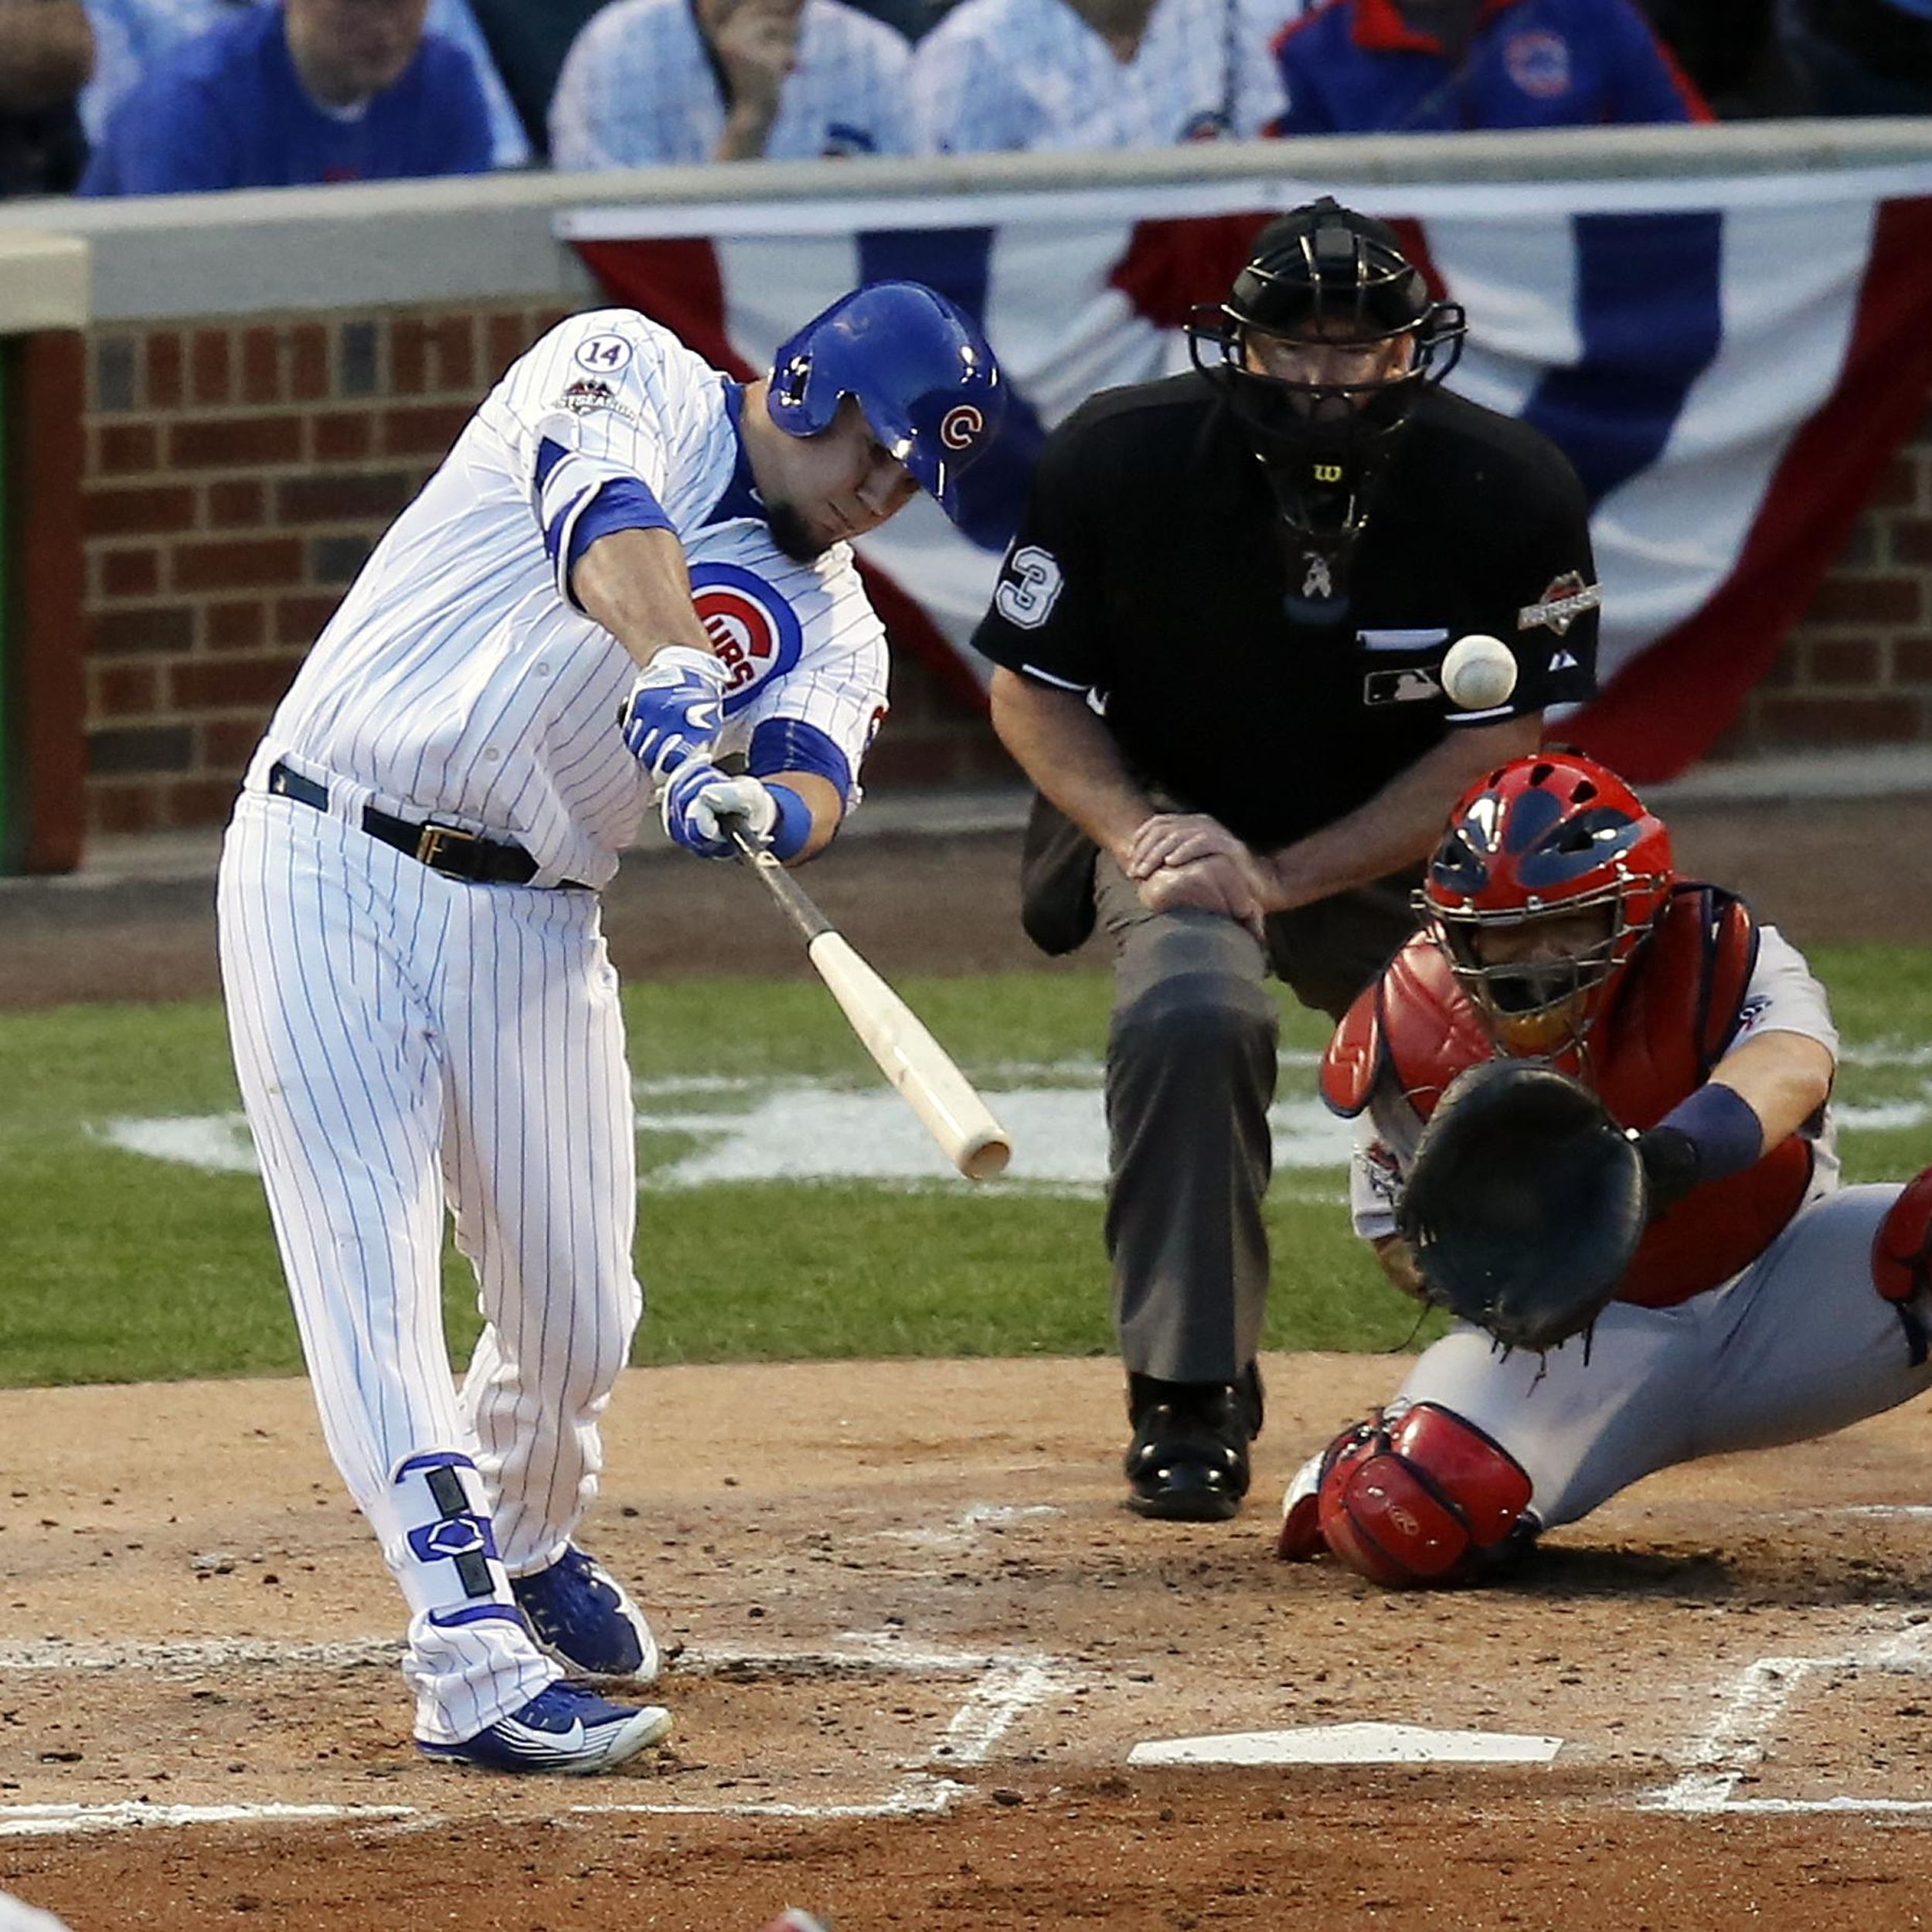 Wake Up With Kyle Schwarber's 2015 NLDS Home Run Against The